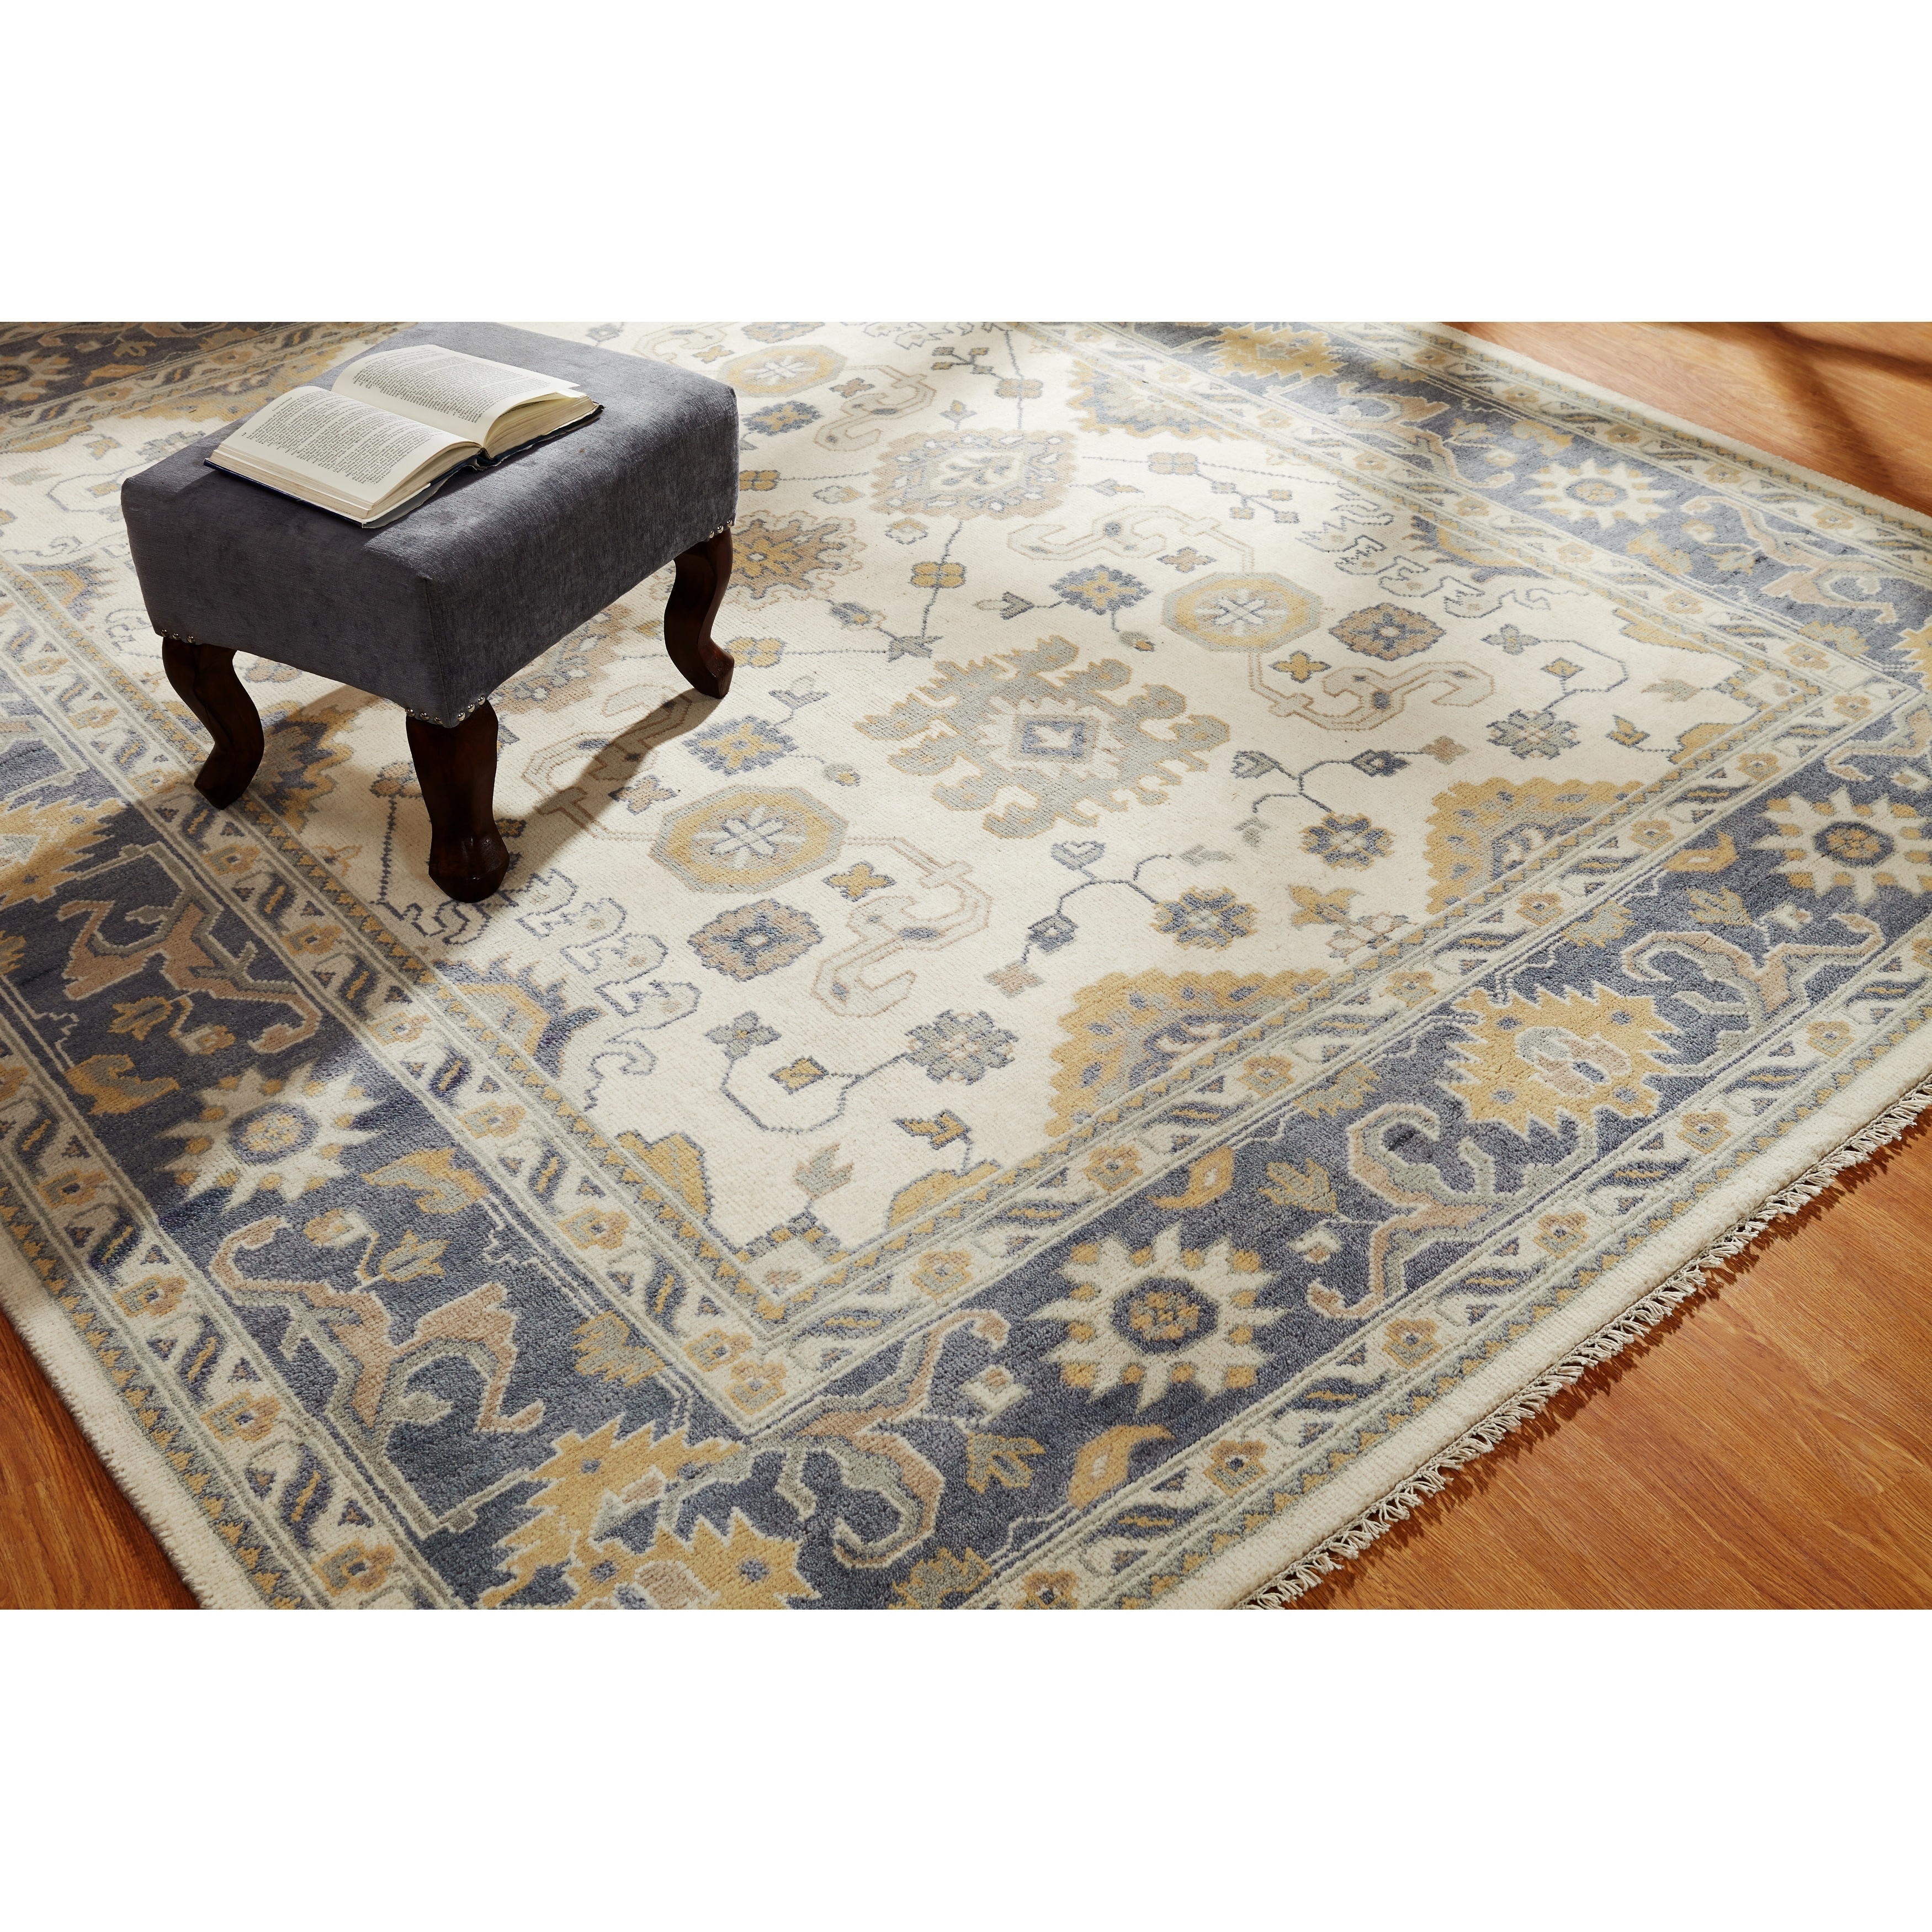 Umbria Ivory/grey Hand-knotted Wool Rug